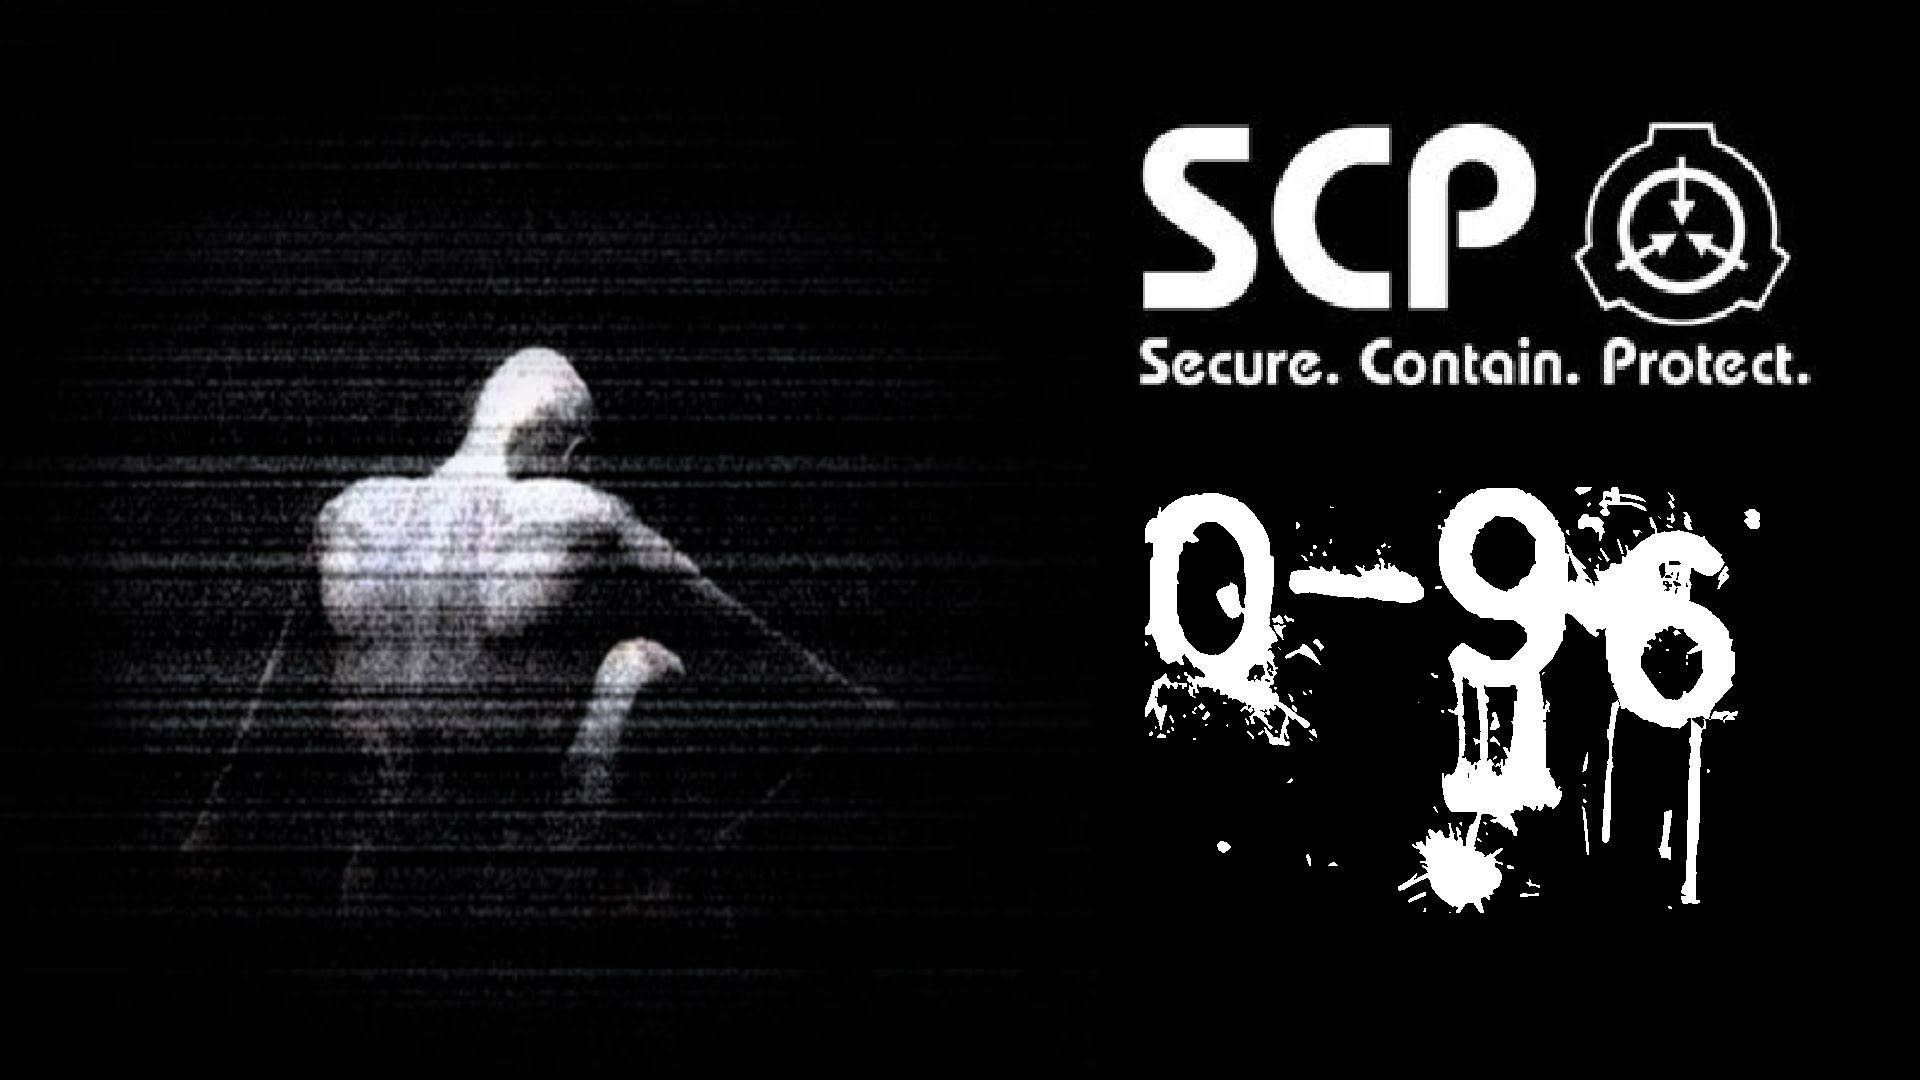 Scp 0-96 In Black Poster Background